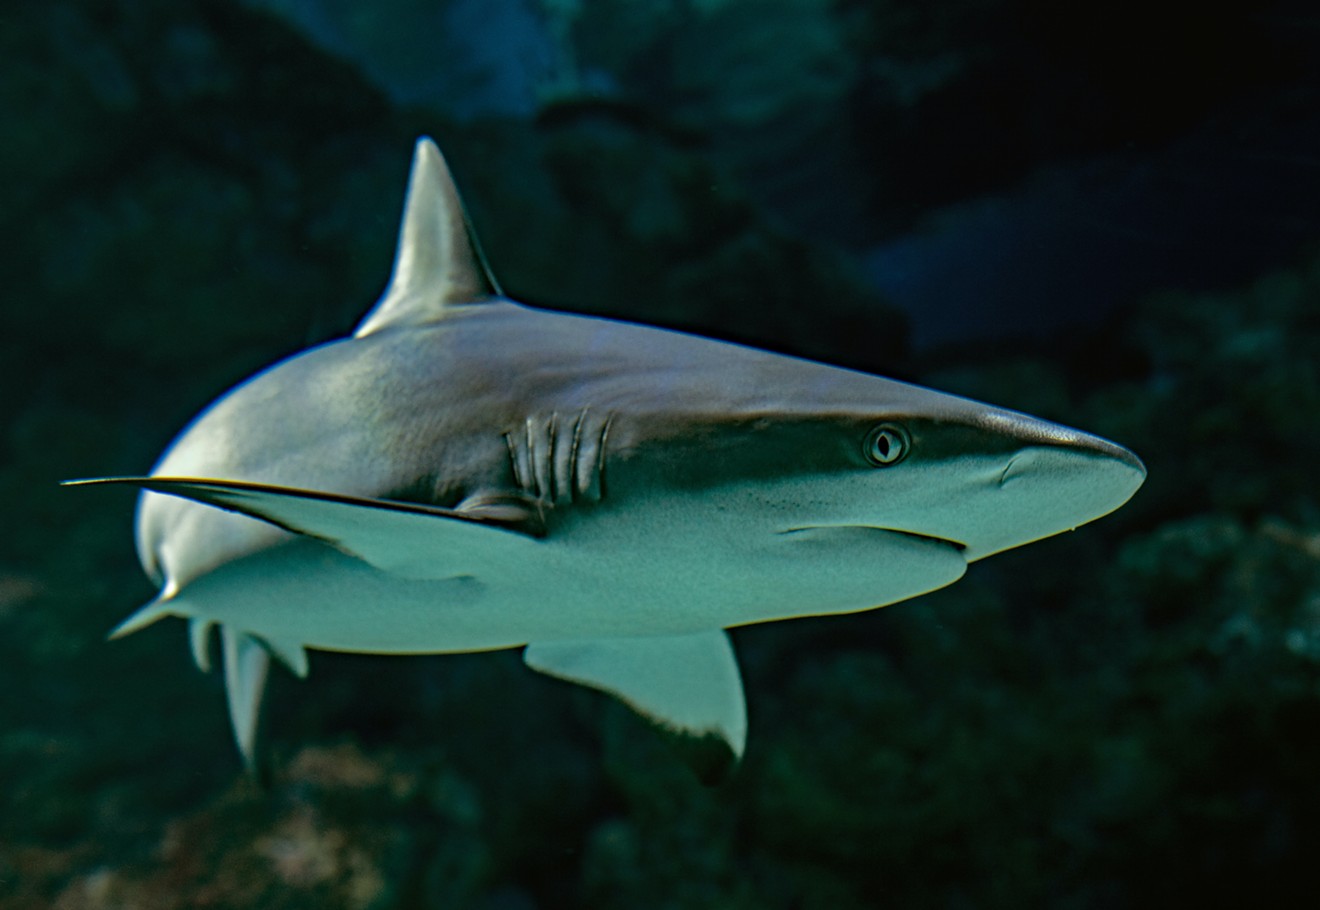 Conservationists say more needs to be done to protect endangered species of sharks.